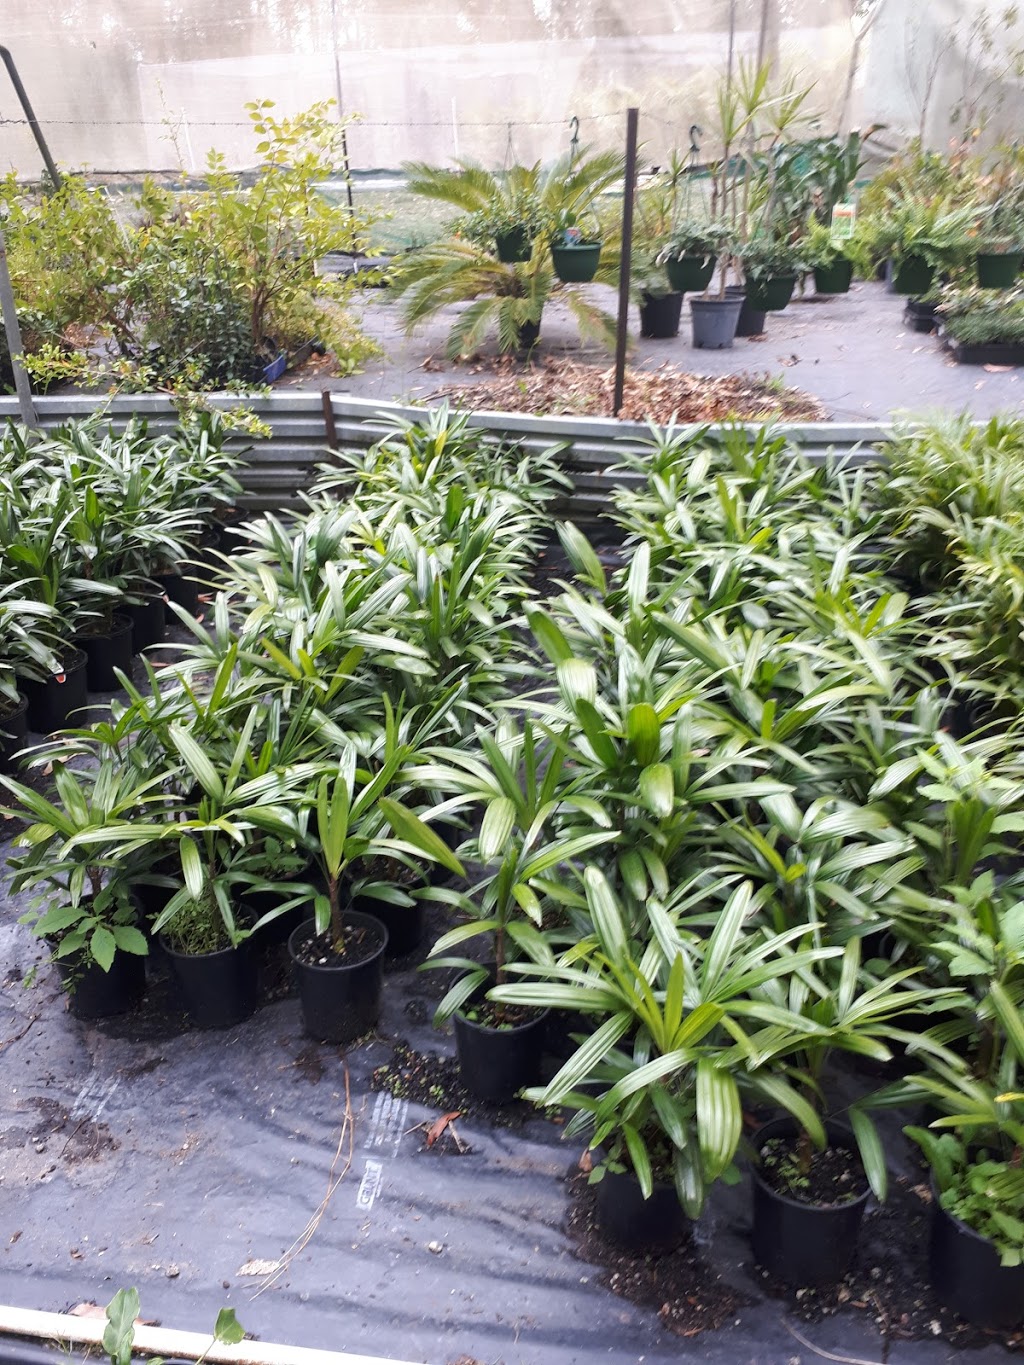 Coopernook palms and plants | 29 Turpentine Rd, Coopernook NSW 2426, Australia | Phone: 0476 267 607